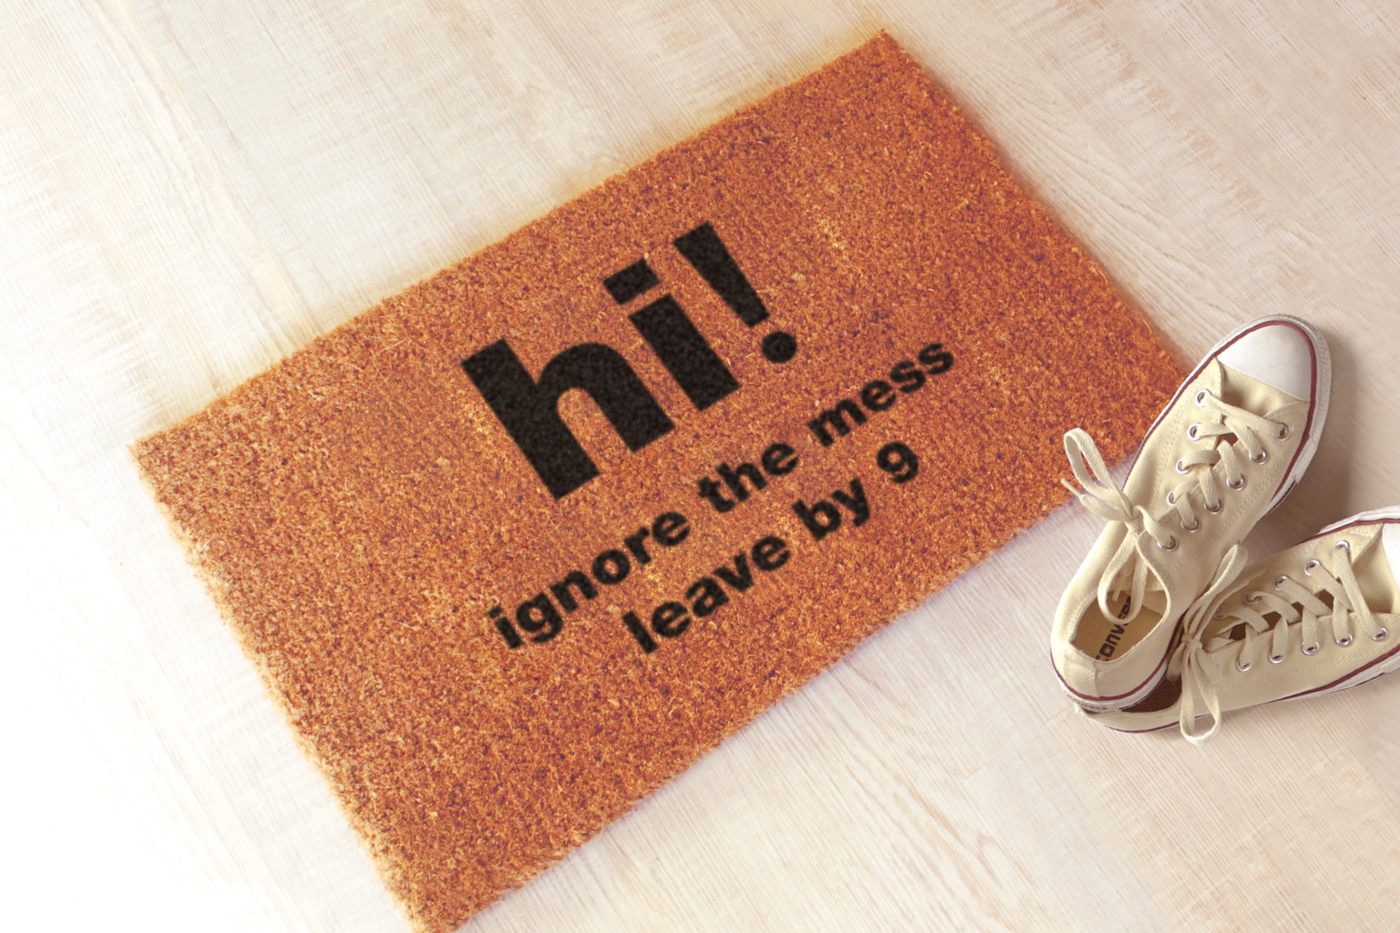 Doormat that says "hi! ignore the mess leave by 9"